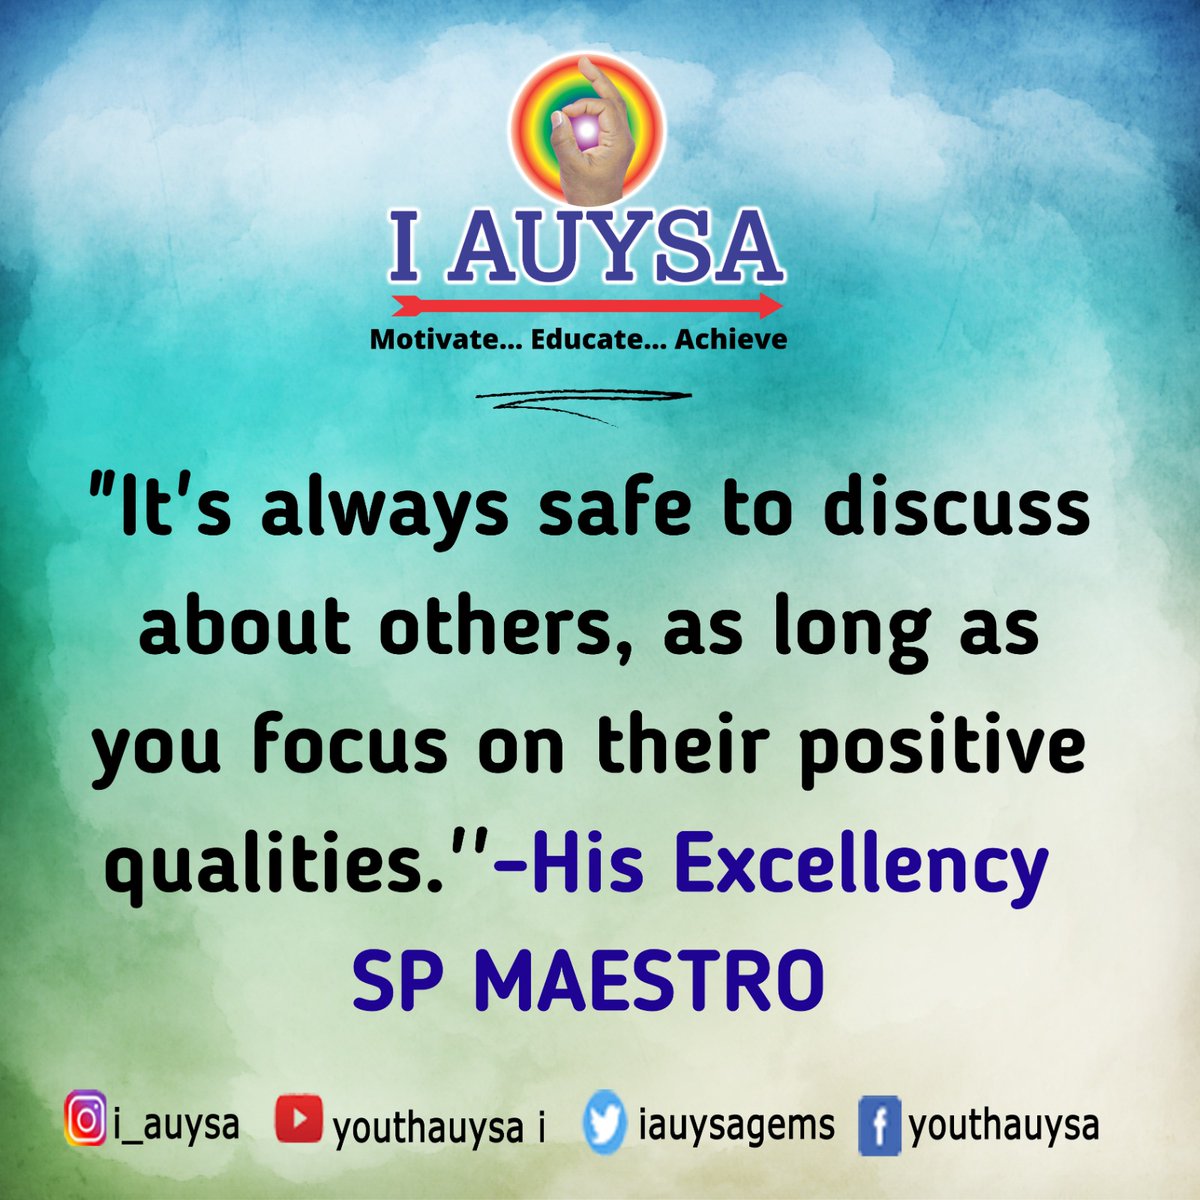 #iauysa #iauysagems #spmaestro #hisexcellencyspmaestroquotes #youth #perfect #success #motivation #quotes #life #personalitydevelopment #thoughts #actions #positive